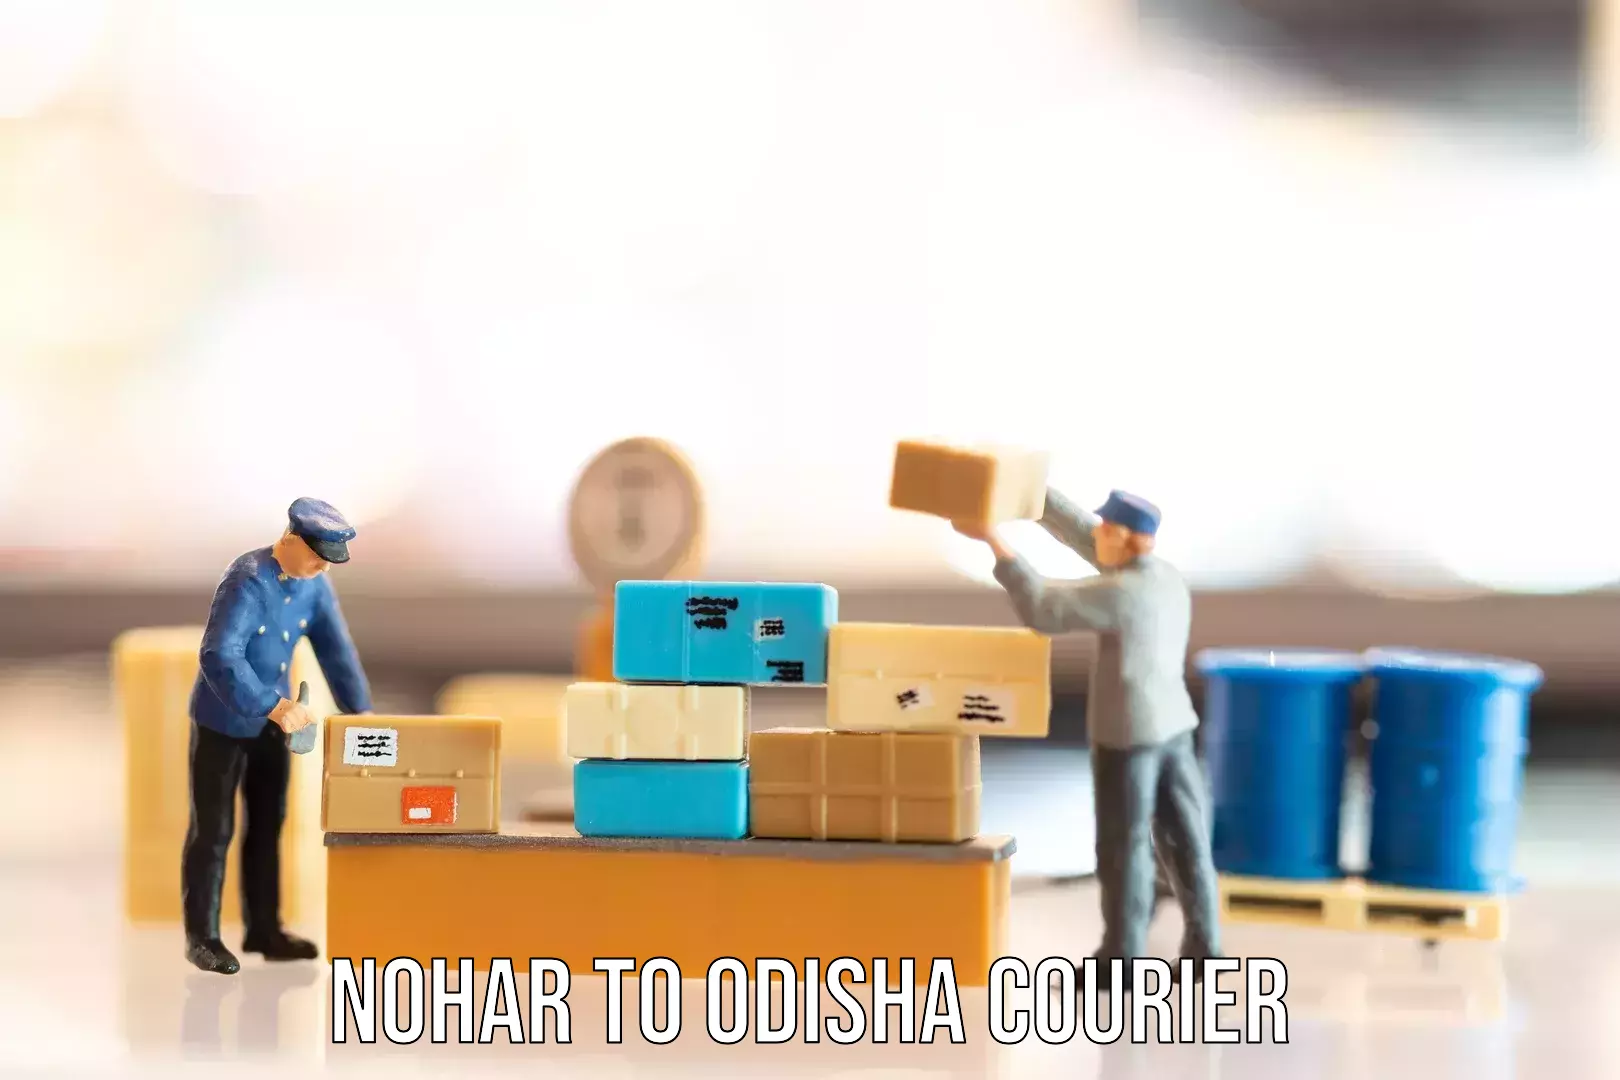 Business luggage transport in Nohar to Odisha